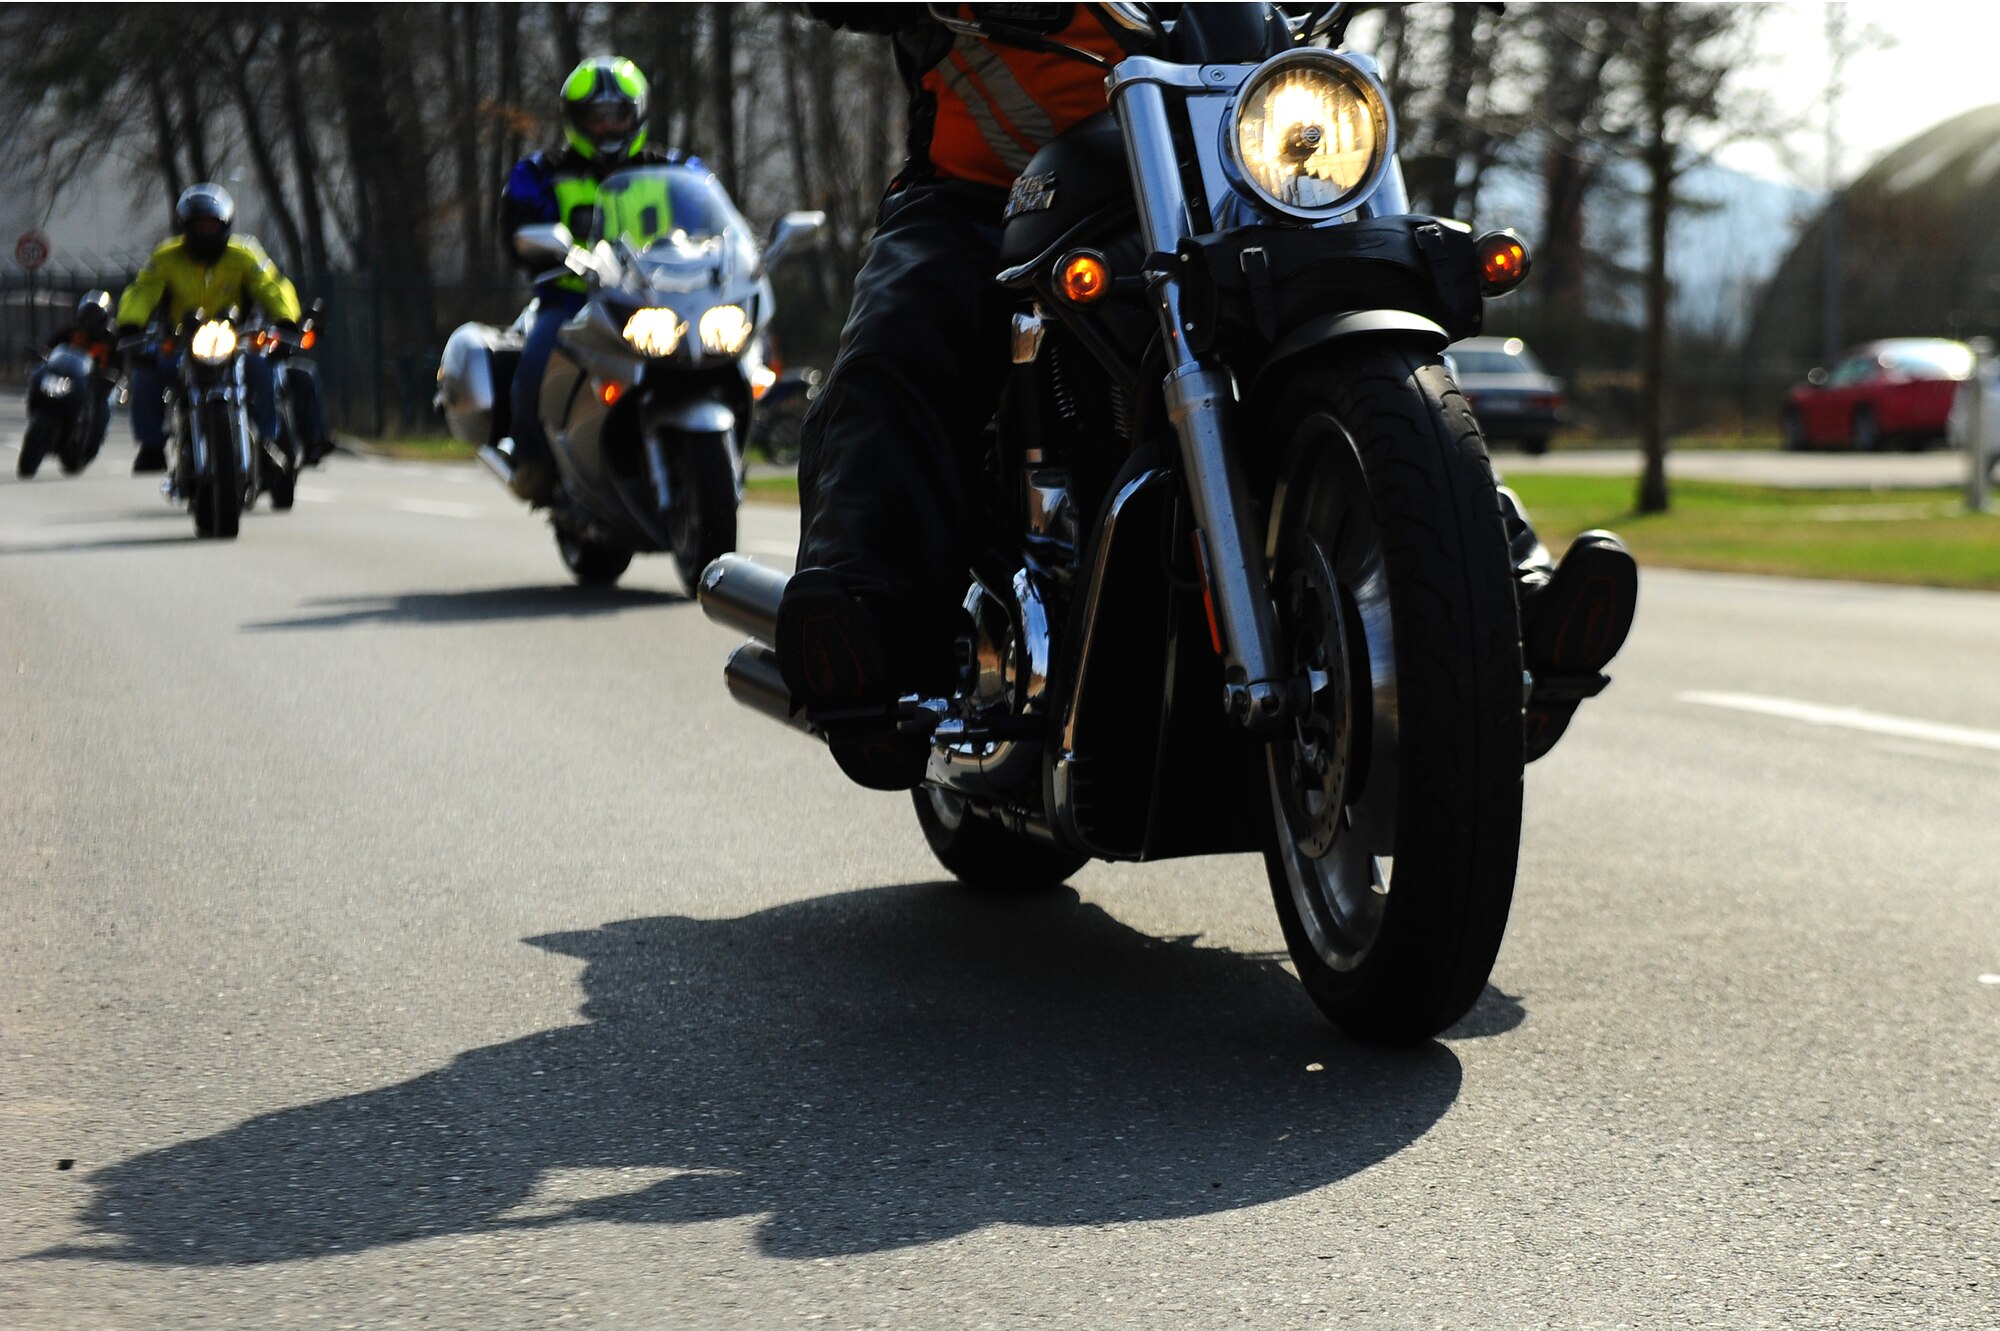 The 86th Maintenance Group participate in a mentor ride during Motorcycle Safety Day, Ramstein Air Base, Germany, March 17, 2012. The safety day was held for the 86th MXG to promote safe motorcycle practices and raise camaraderie amongst the participants. (U.S. Air Force photo/Airman Brea Miller)